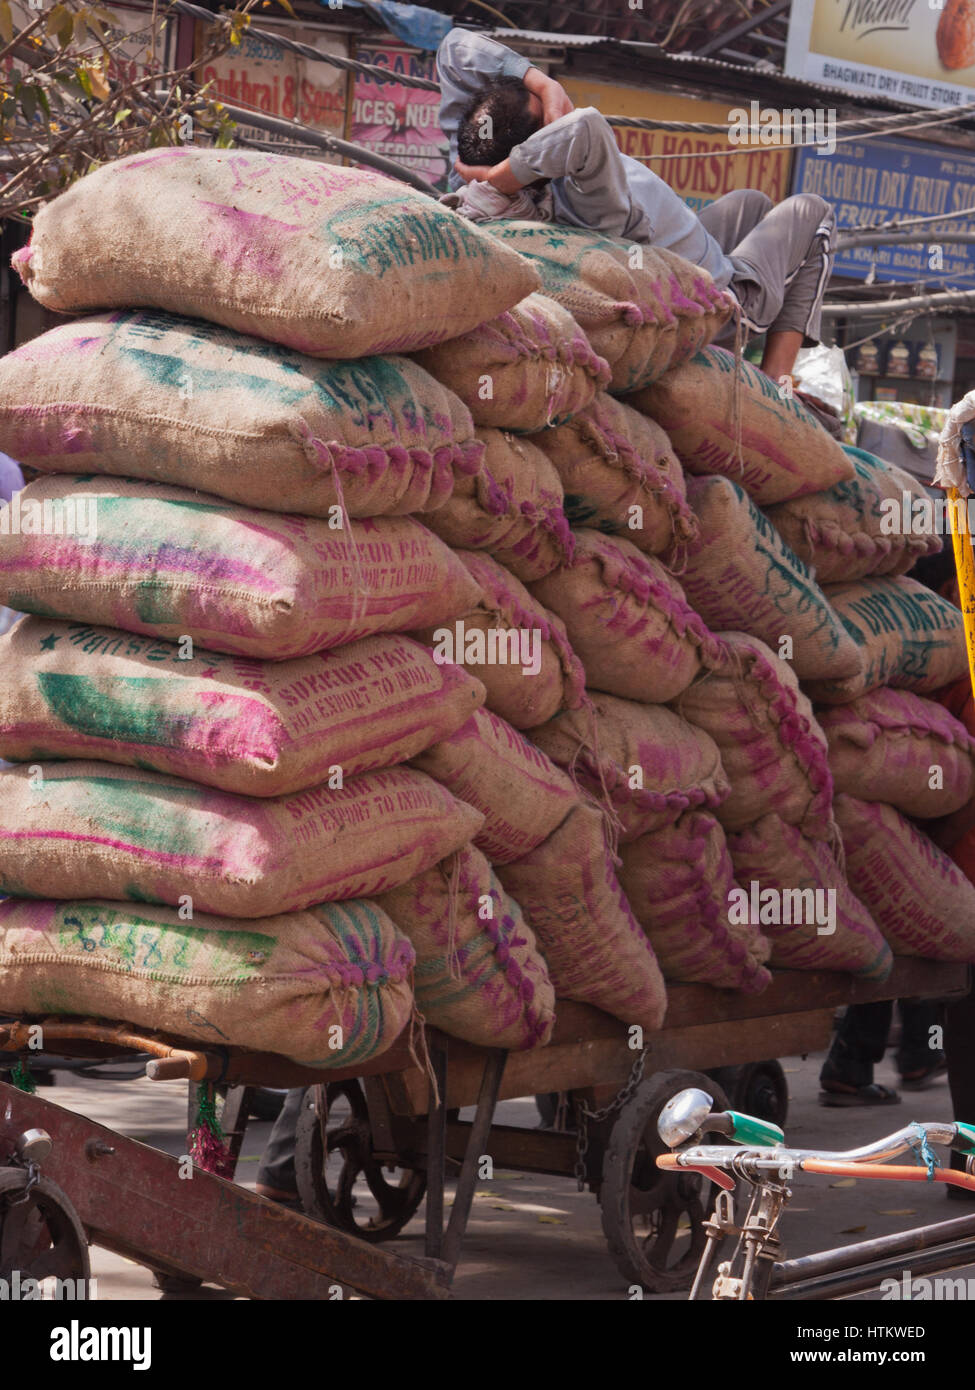 A worker resting on a cart full of grain sacks, taking an impromptu break from transporting goods in the heart of the old city of Delhi Stock Photo